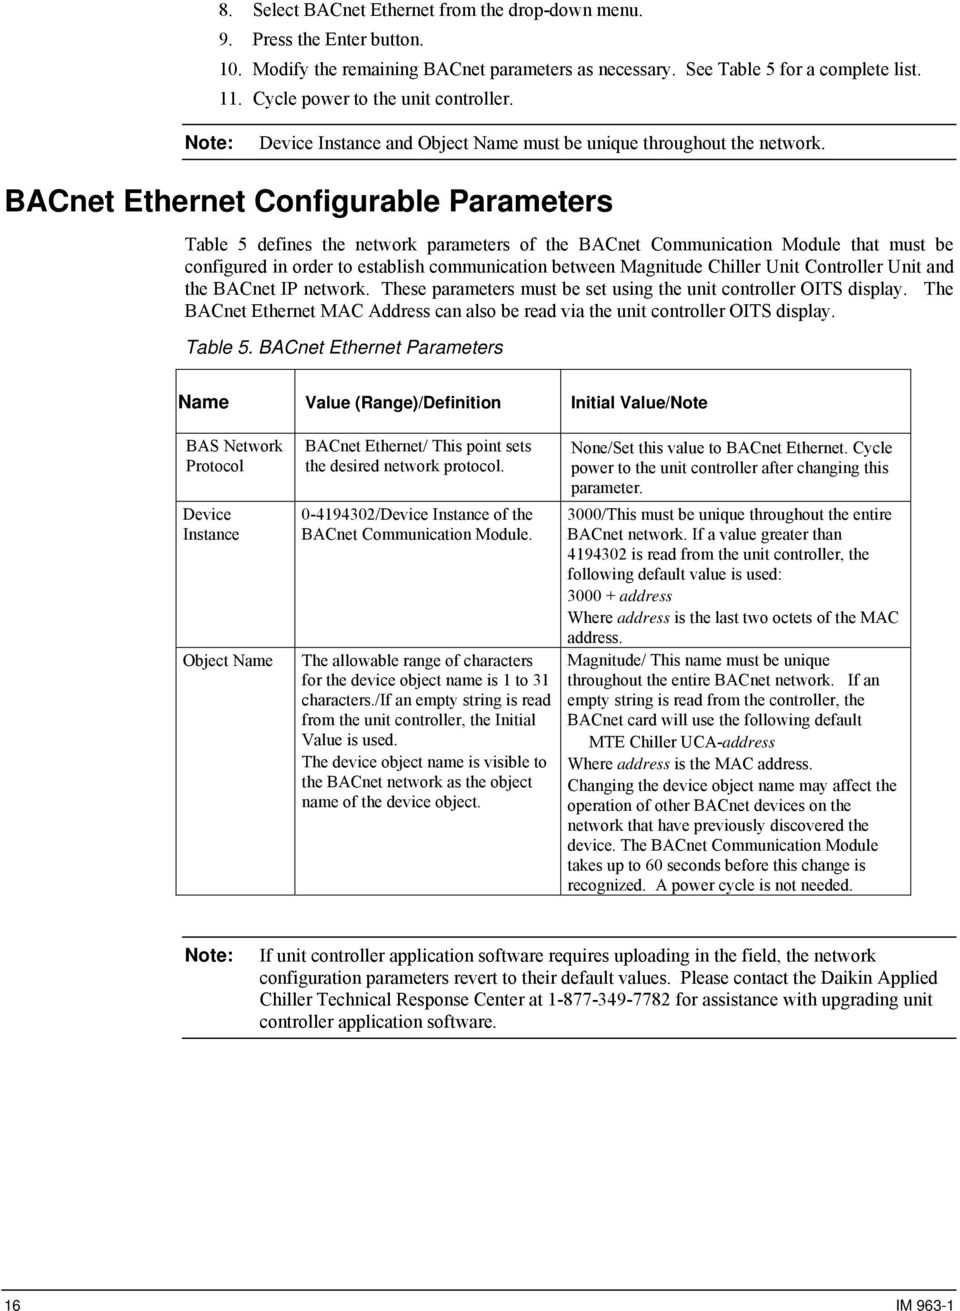 BACnet Ethernet Configurable Parameters Table 5 defines the network parameters of the BACnet Communication Module that must be configured in order to establish communication between Magnitude Chiller